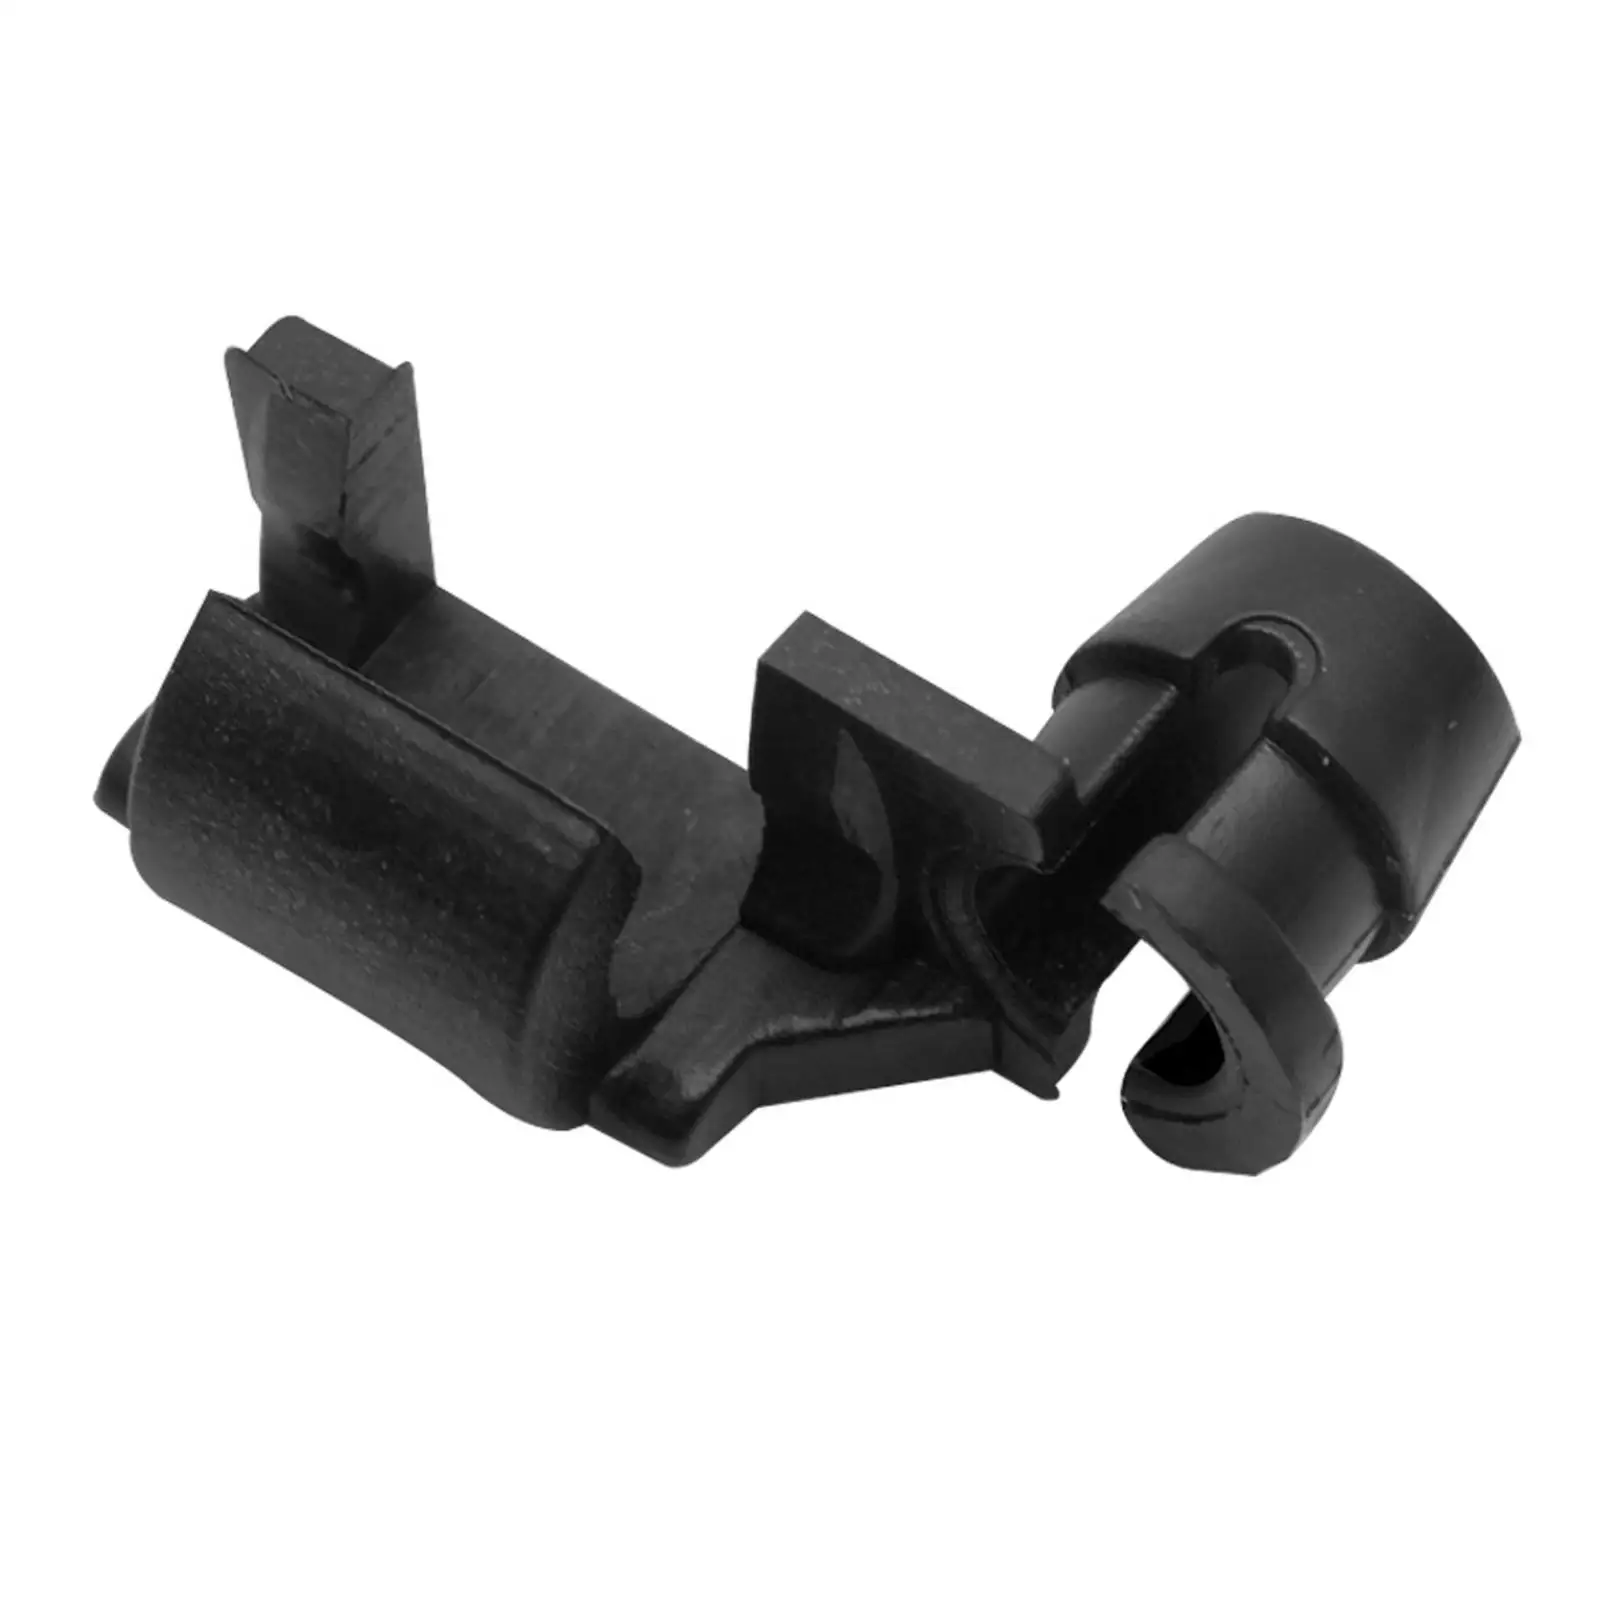 Joint Link 6E9-41237-00 Vehicle Spare Parts for Outboard Engine Convenient